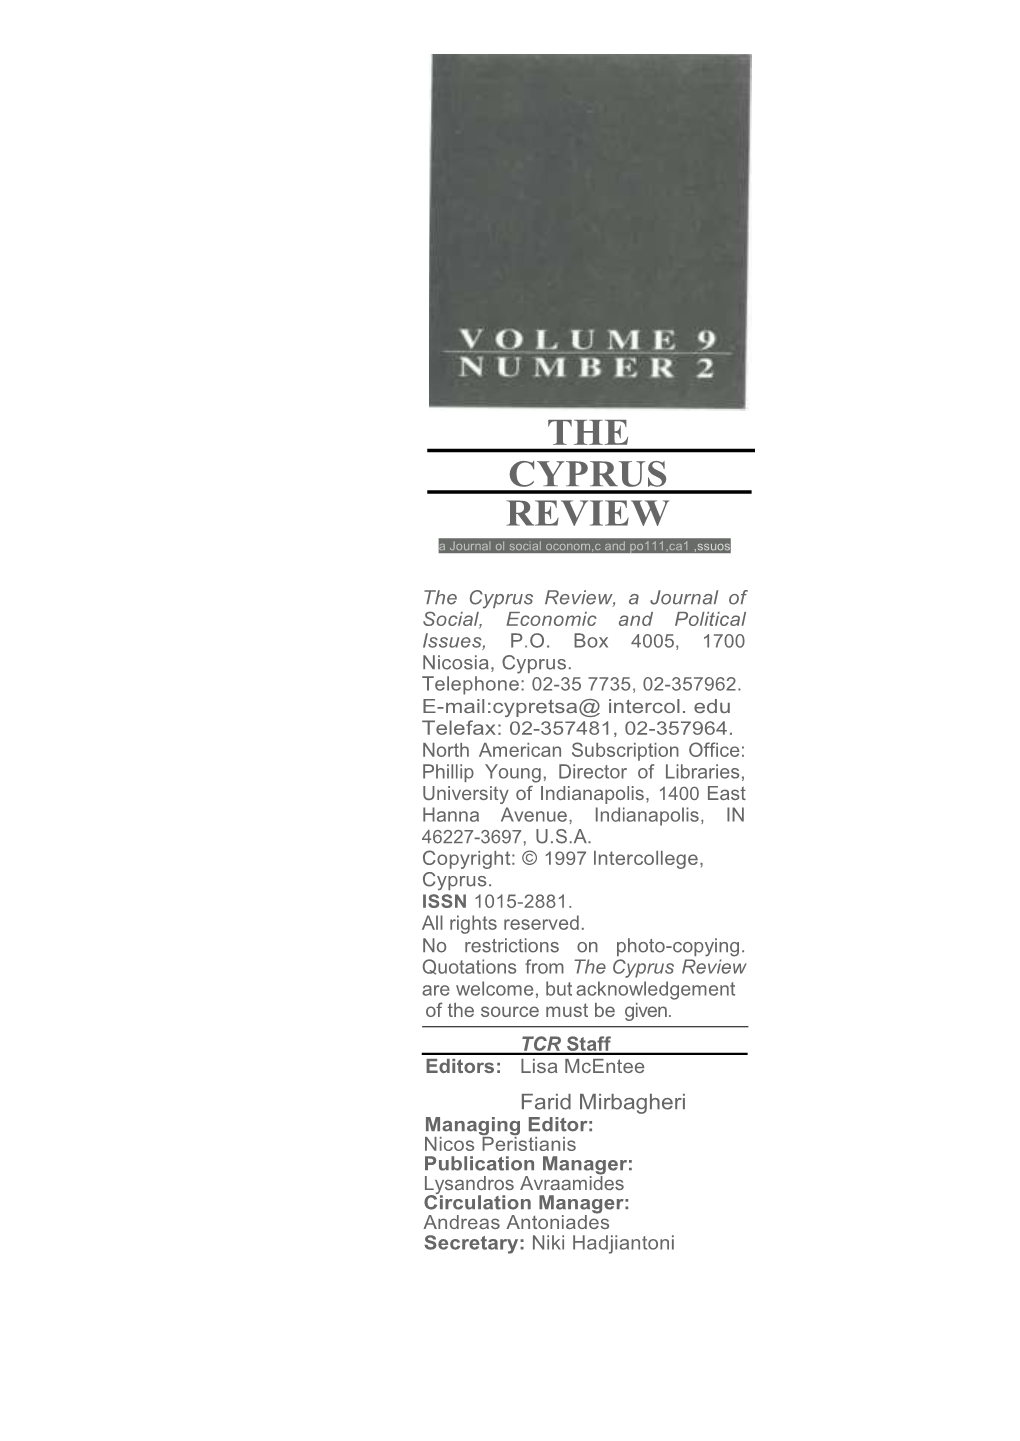 THE CYPRUS REVIEW a Journal Ol Social Oconom,C and Po111,Ca1 ,Ssuos